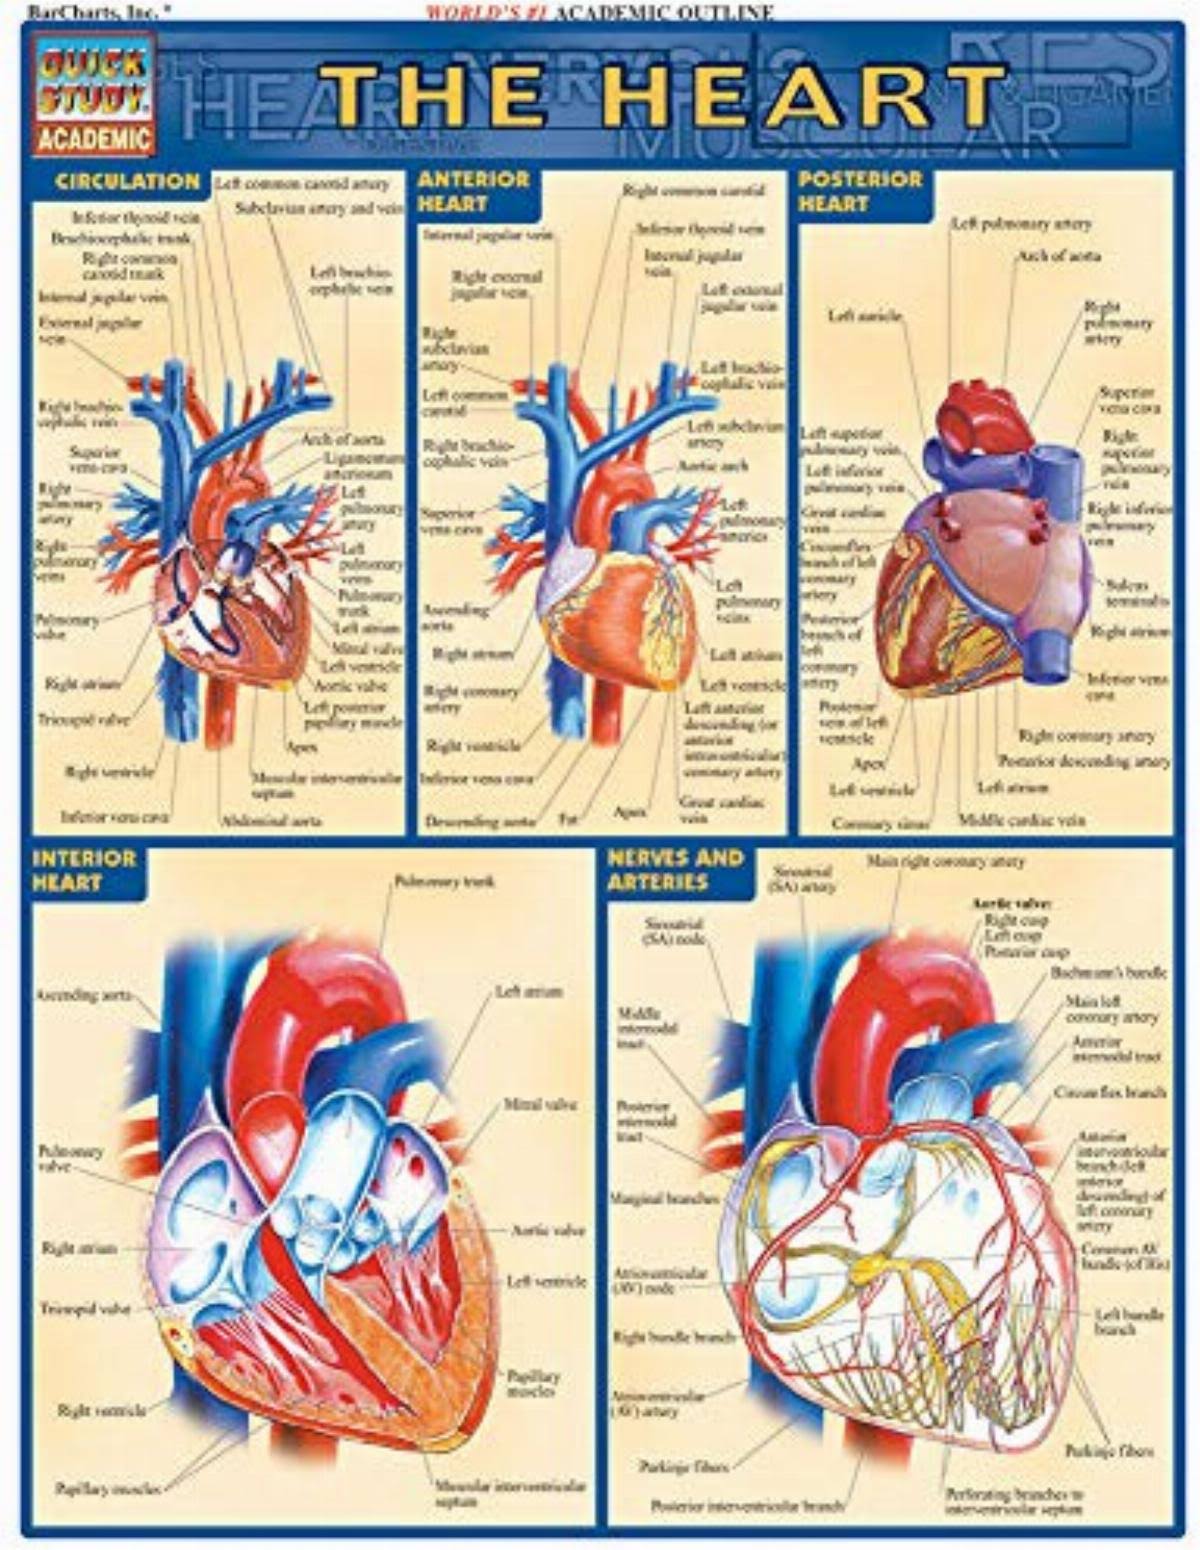 The Heart - Inc Barcharts